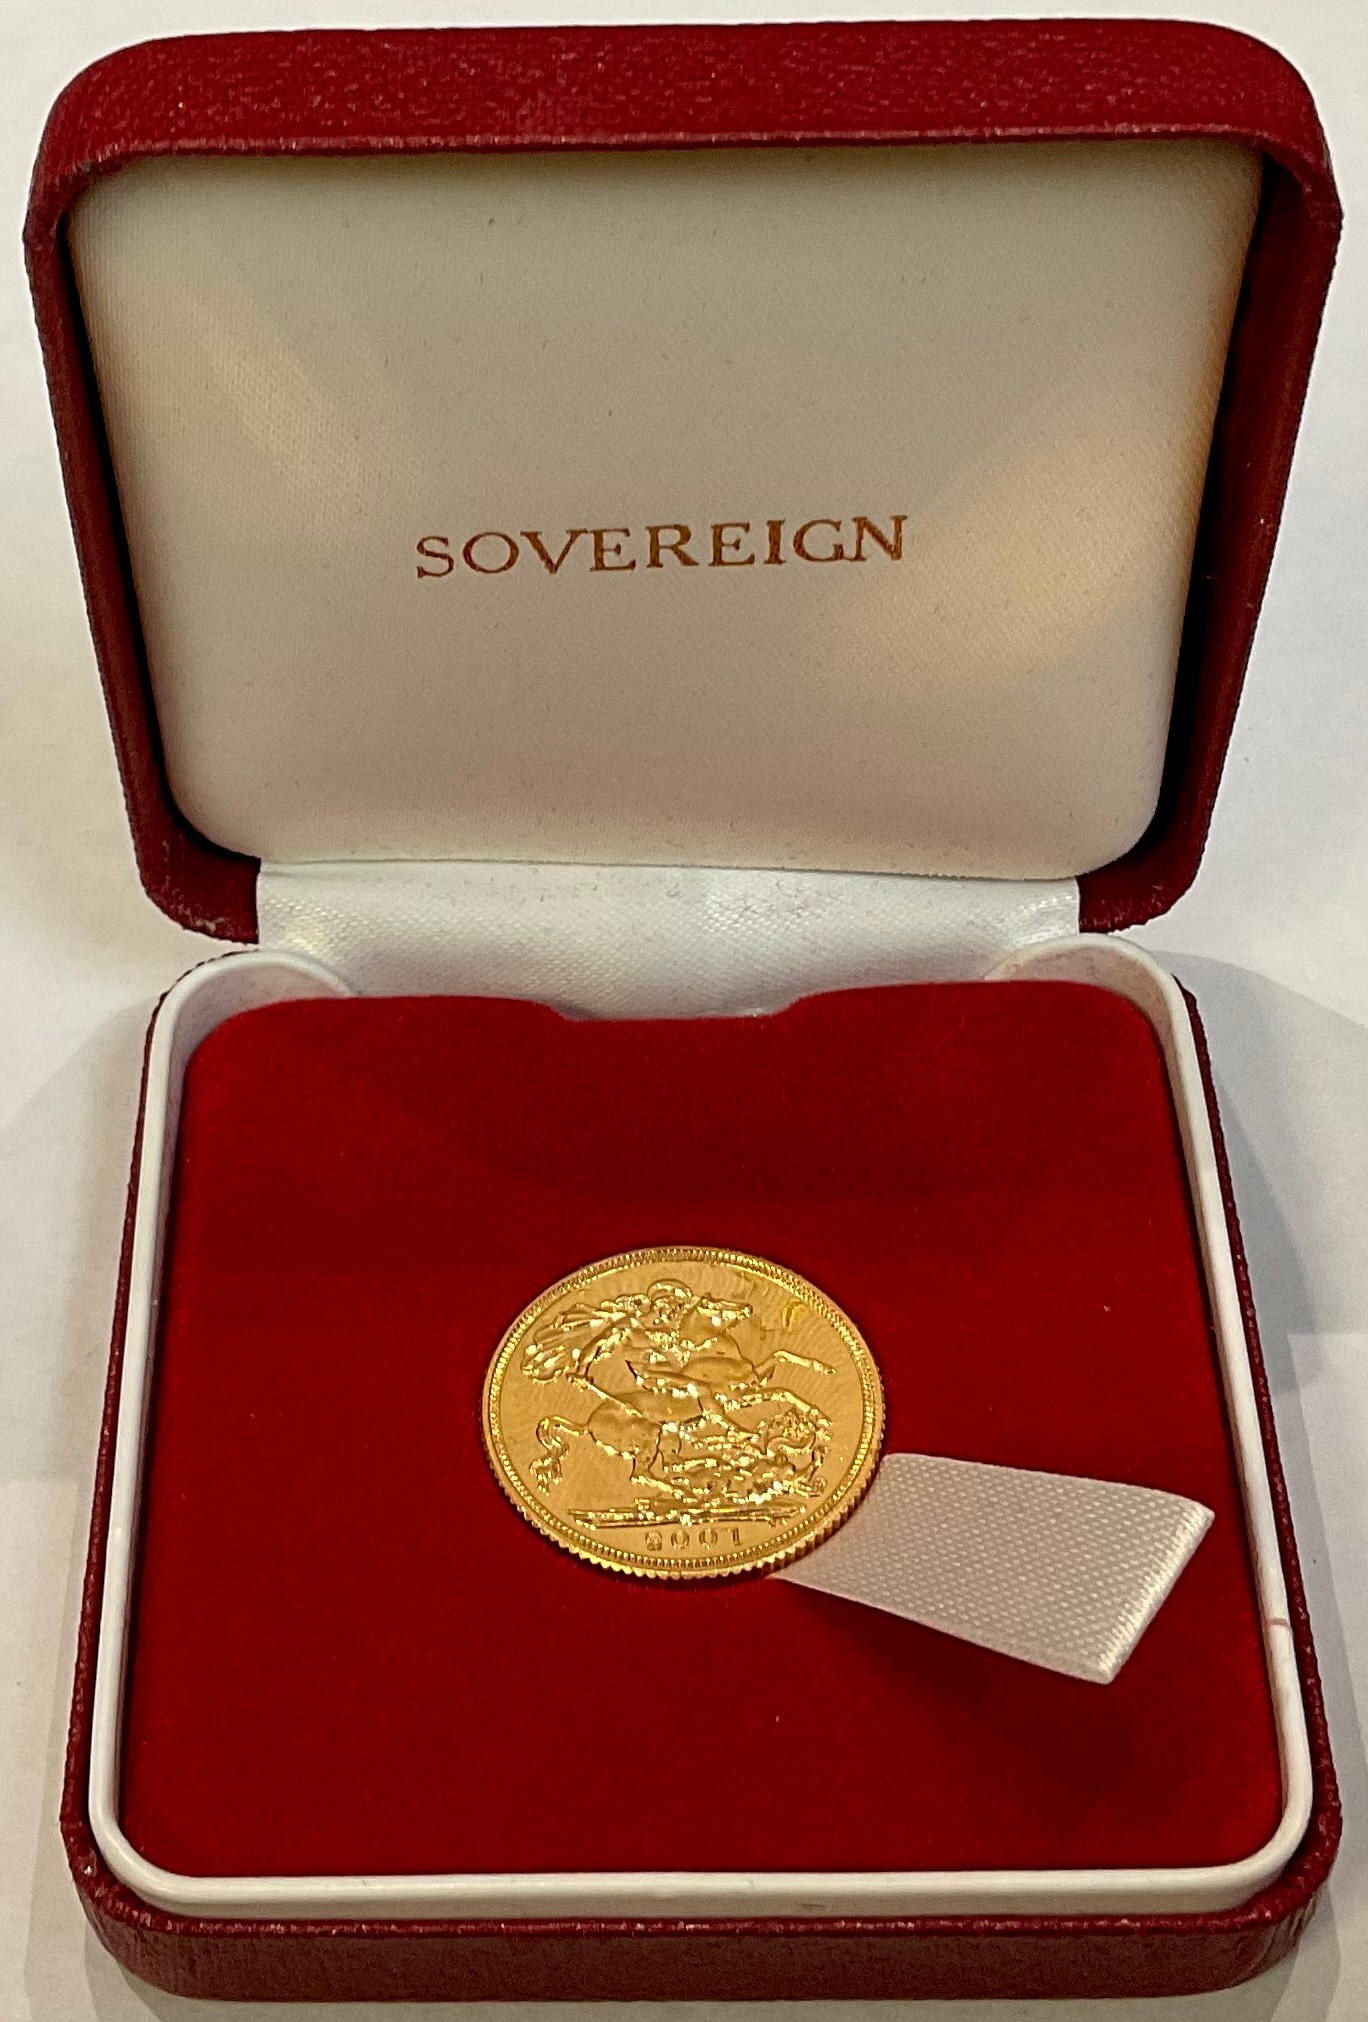 Coin - GB, Elizabeth II gold sovereign, 2001, boxed - Image 2 of 3